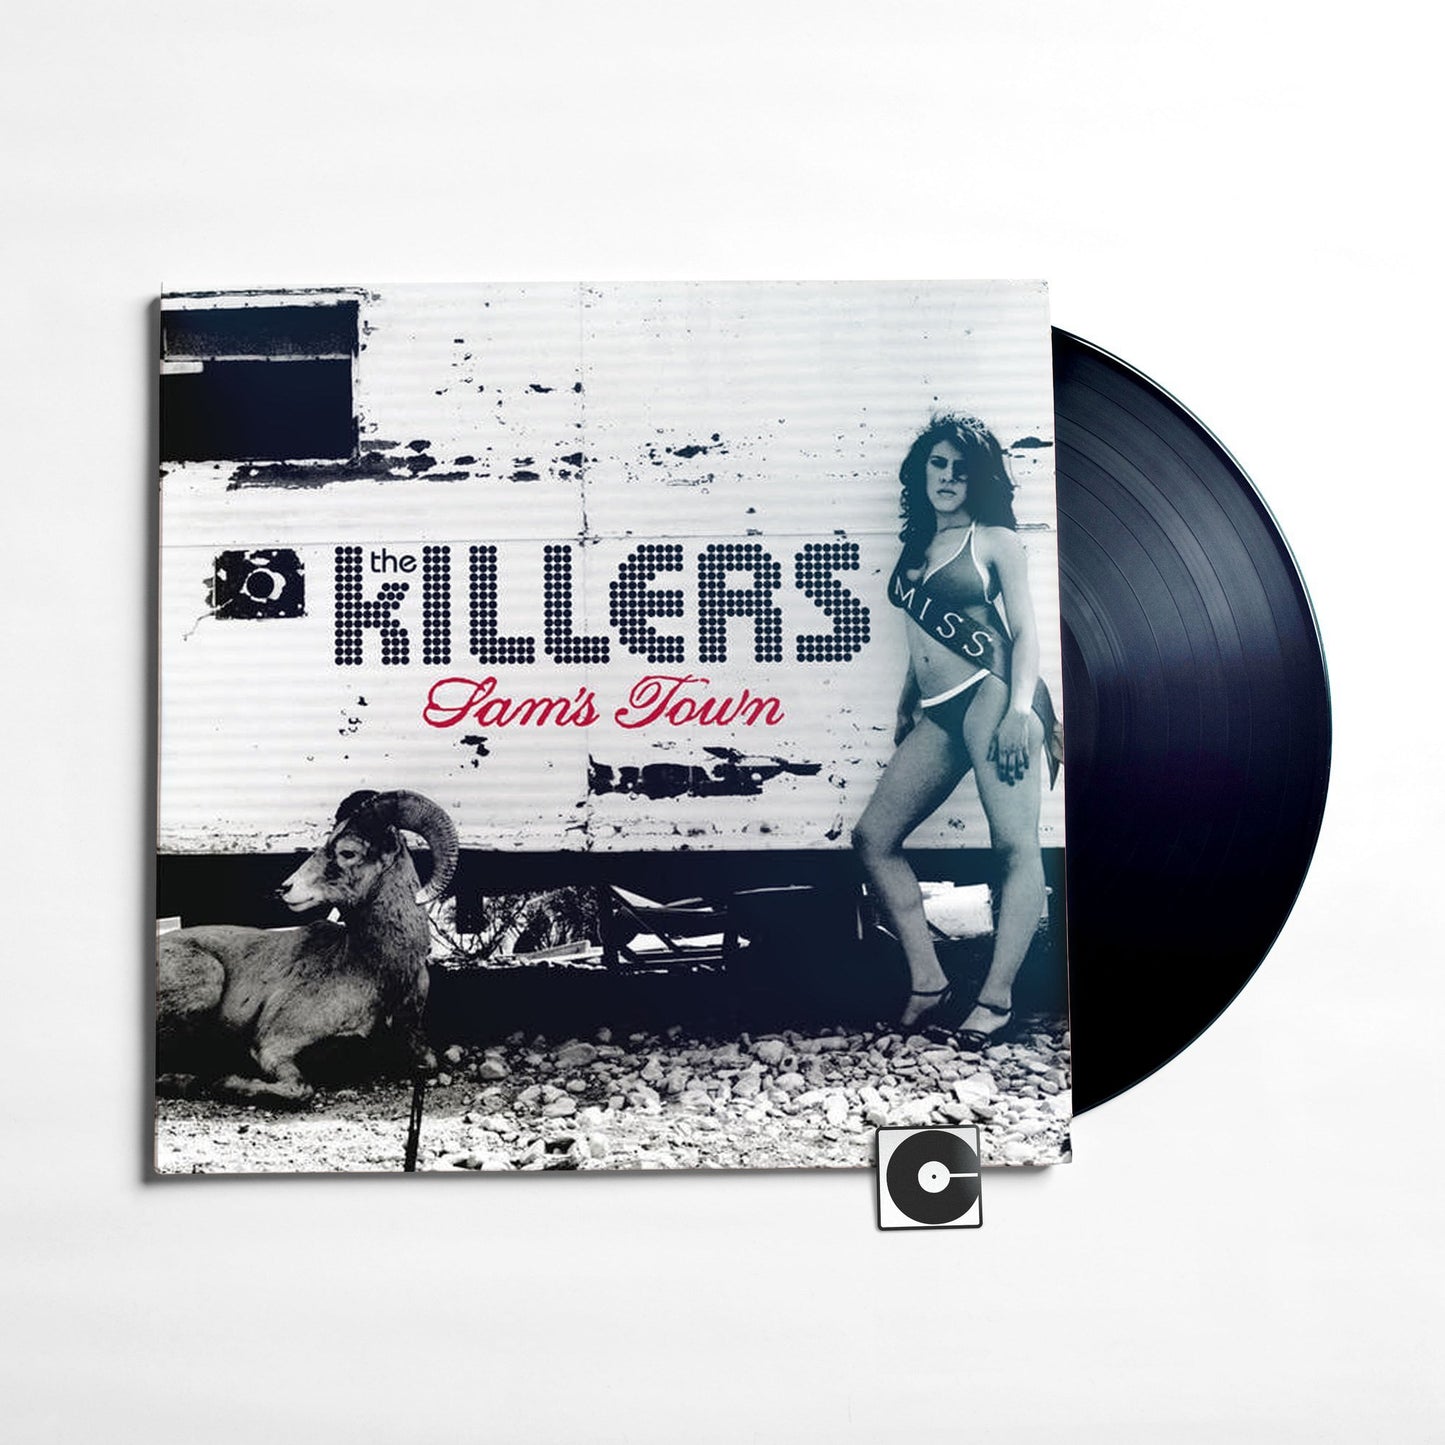 The Killers - "Sam's Town"